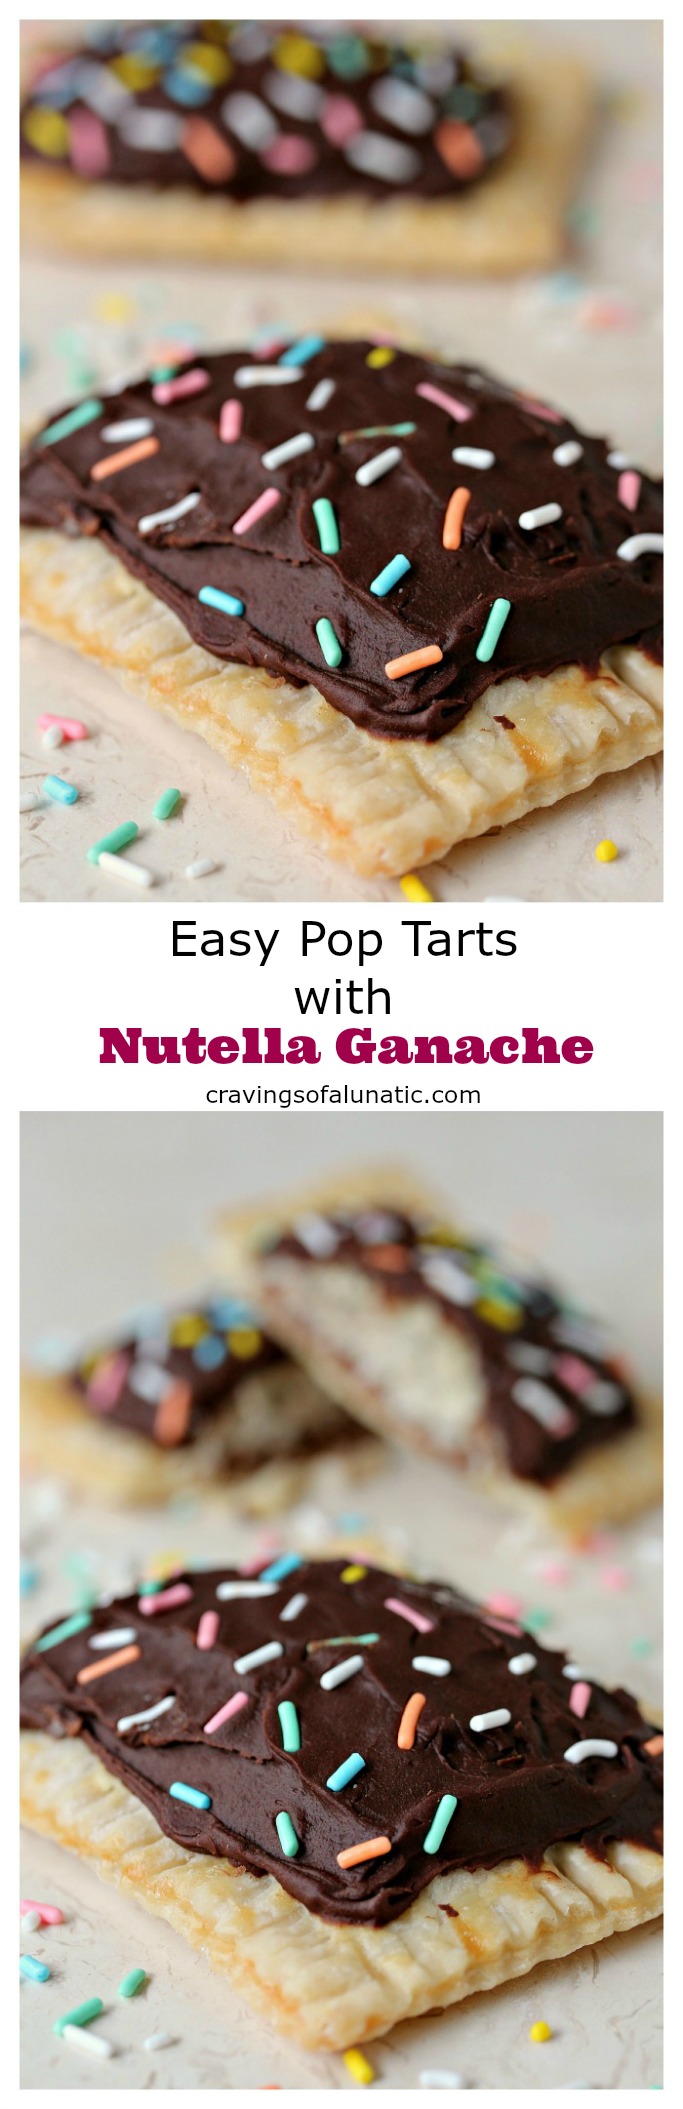 Easy Pop Tarts with Nutella Ganache from cravingsofalunatic.com- Easy to make pop tarts filled with Caramilk Pieces, then topped with Nutella Ganache and Sprinkles. Fun treat to indulge in on weekends and holidays! (@CravingsLunatic)